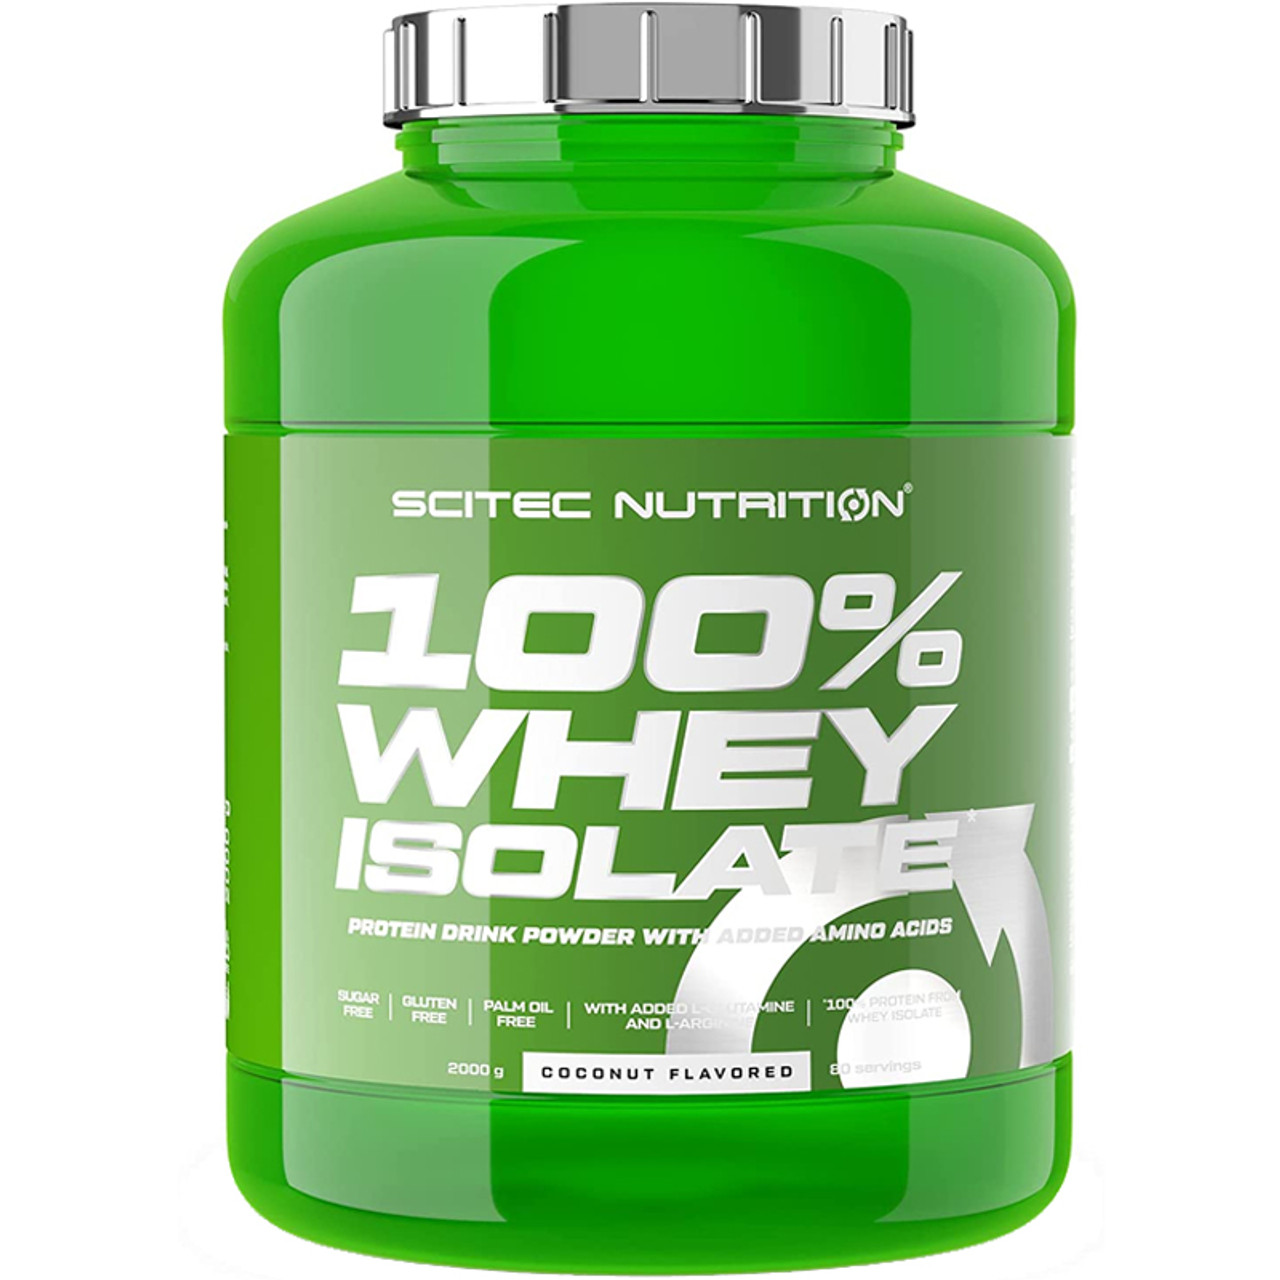 Scitec Nutrition - 100% Whey Isolate - 2000g Coconut